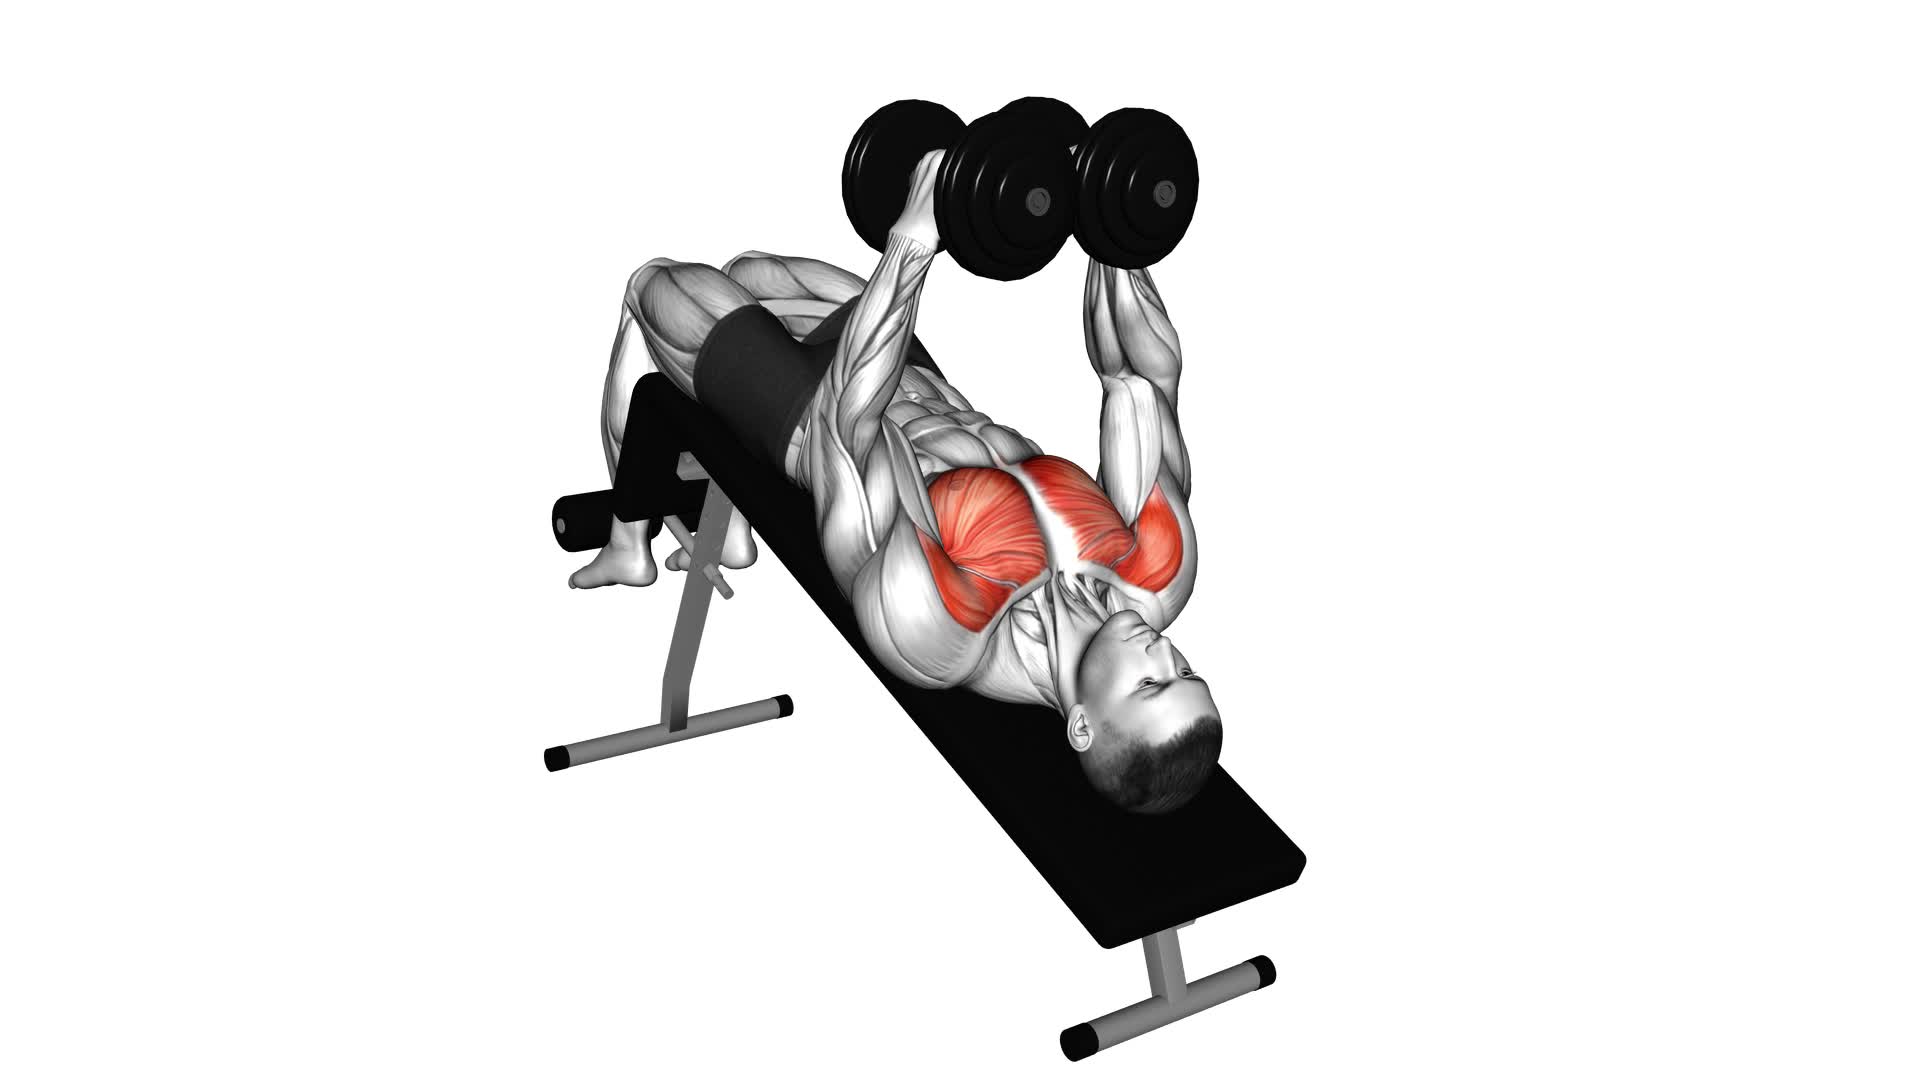 Dumbbell Decline Fly - Video Exercise Guide & Tips